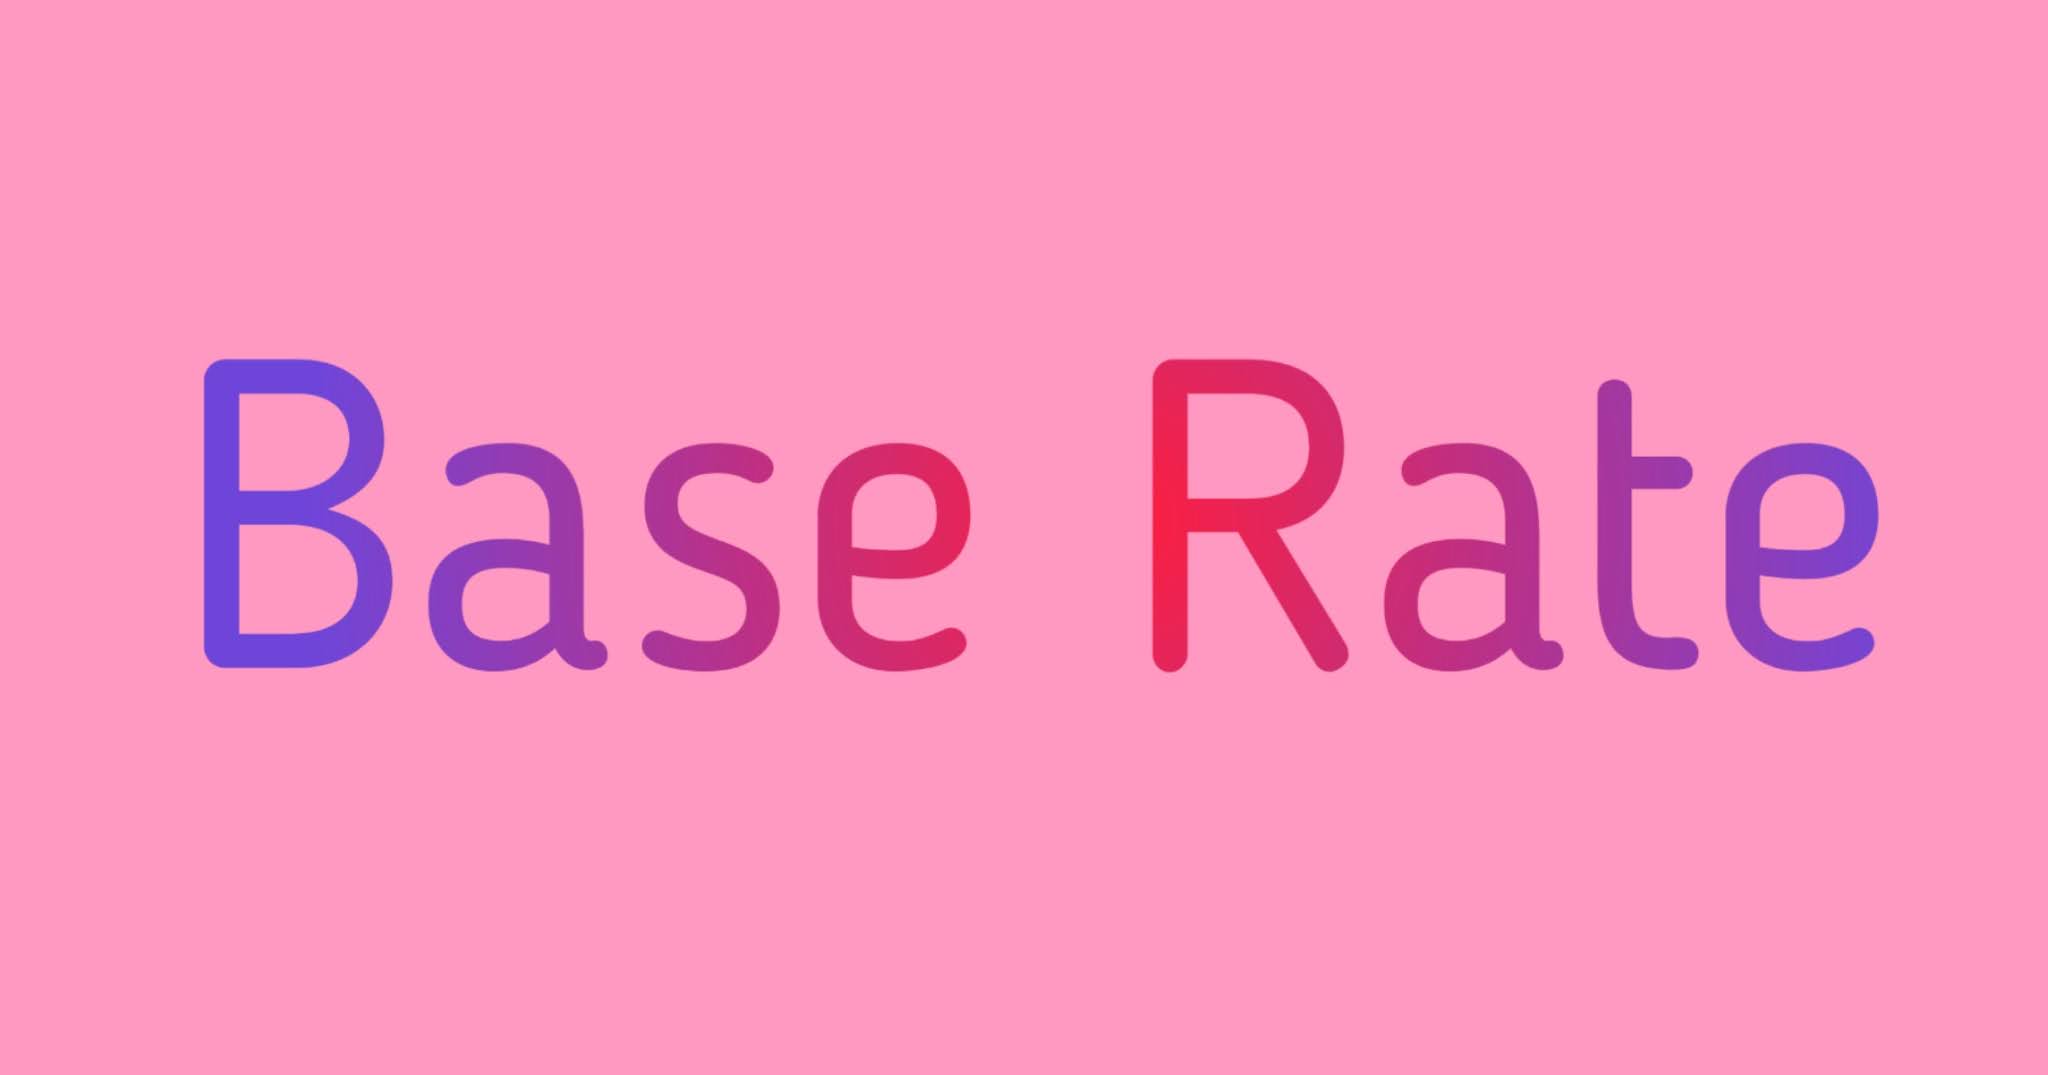 Base Rate